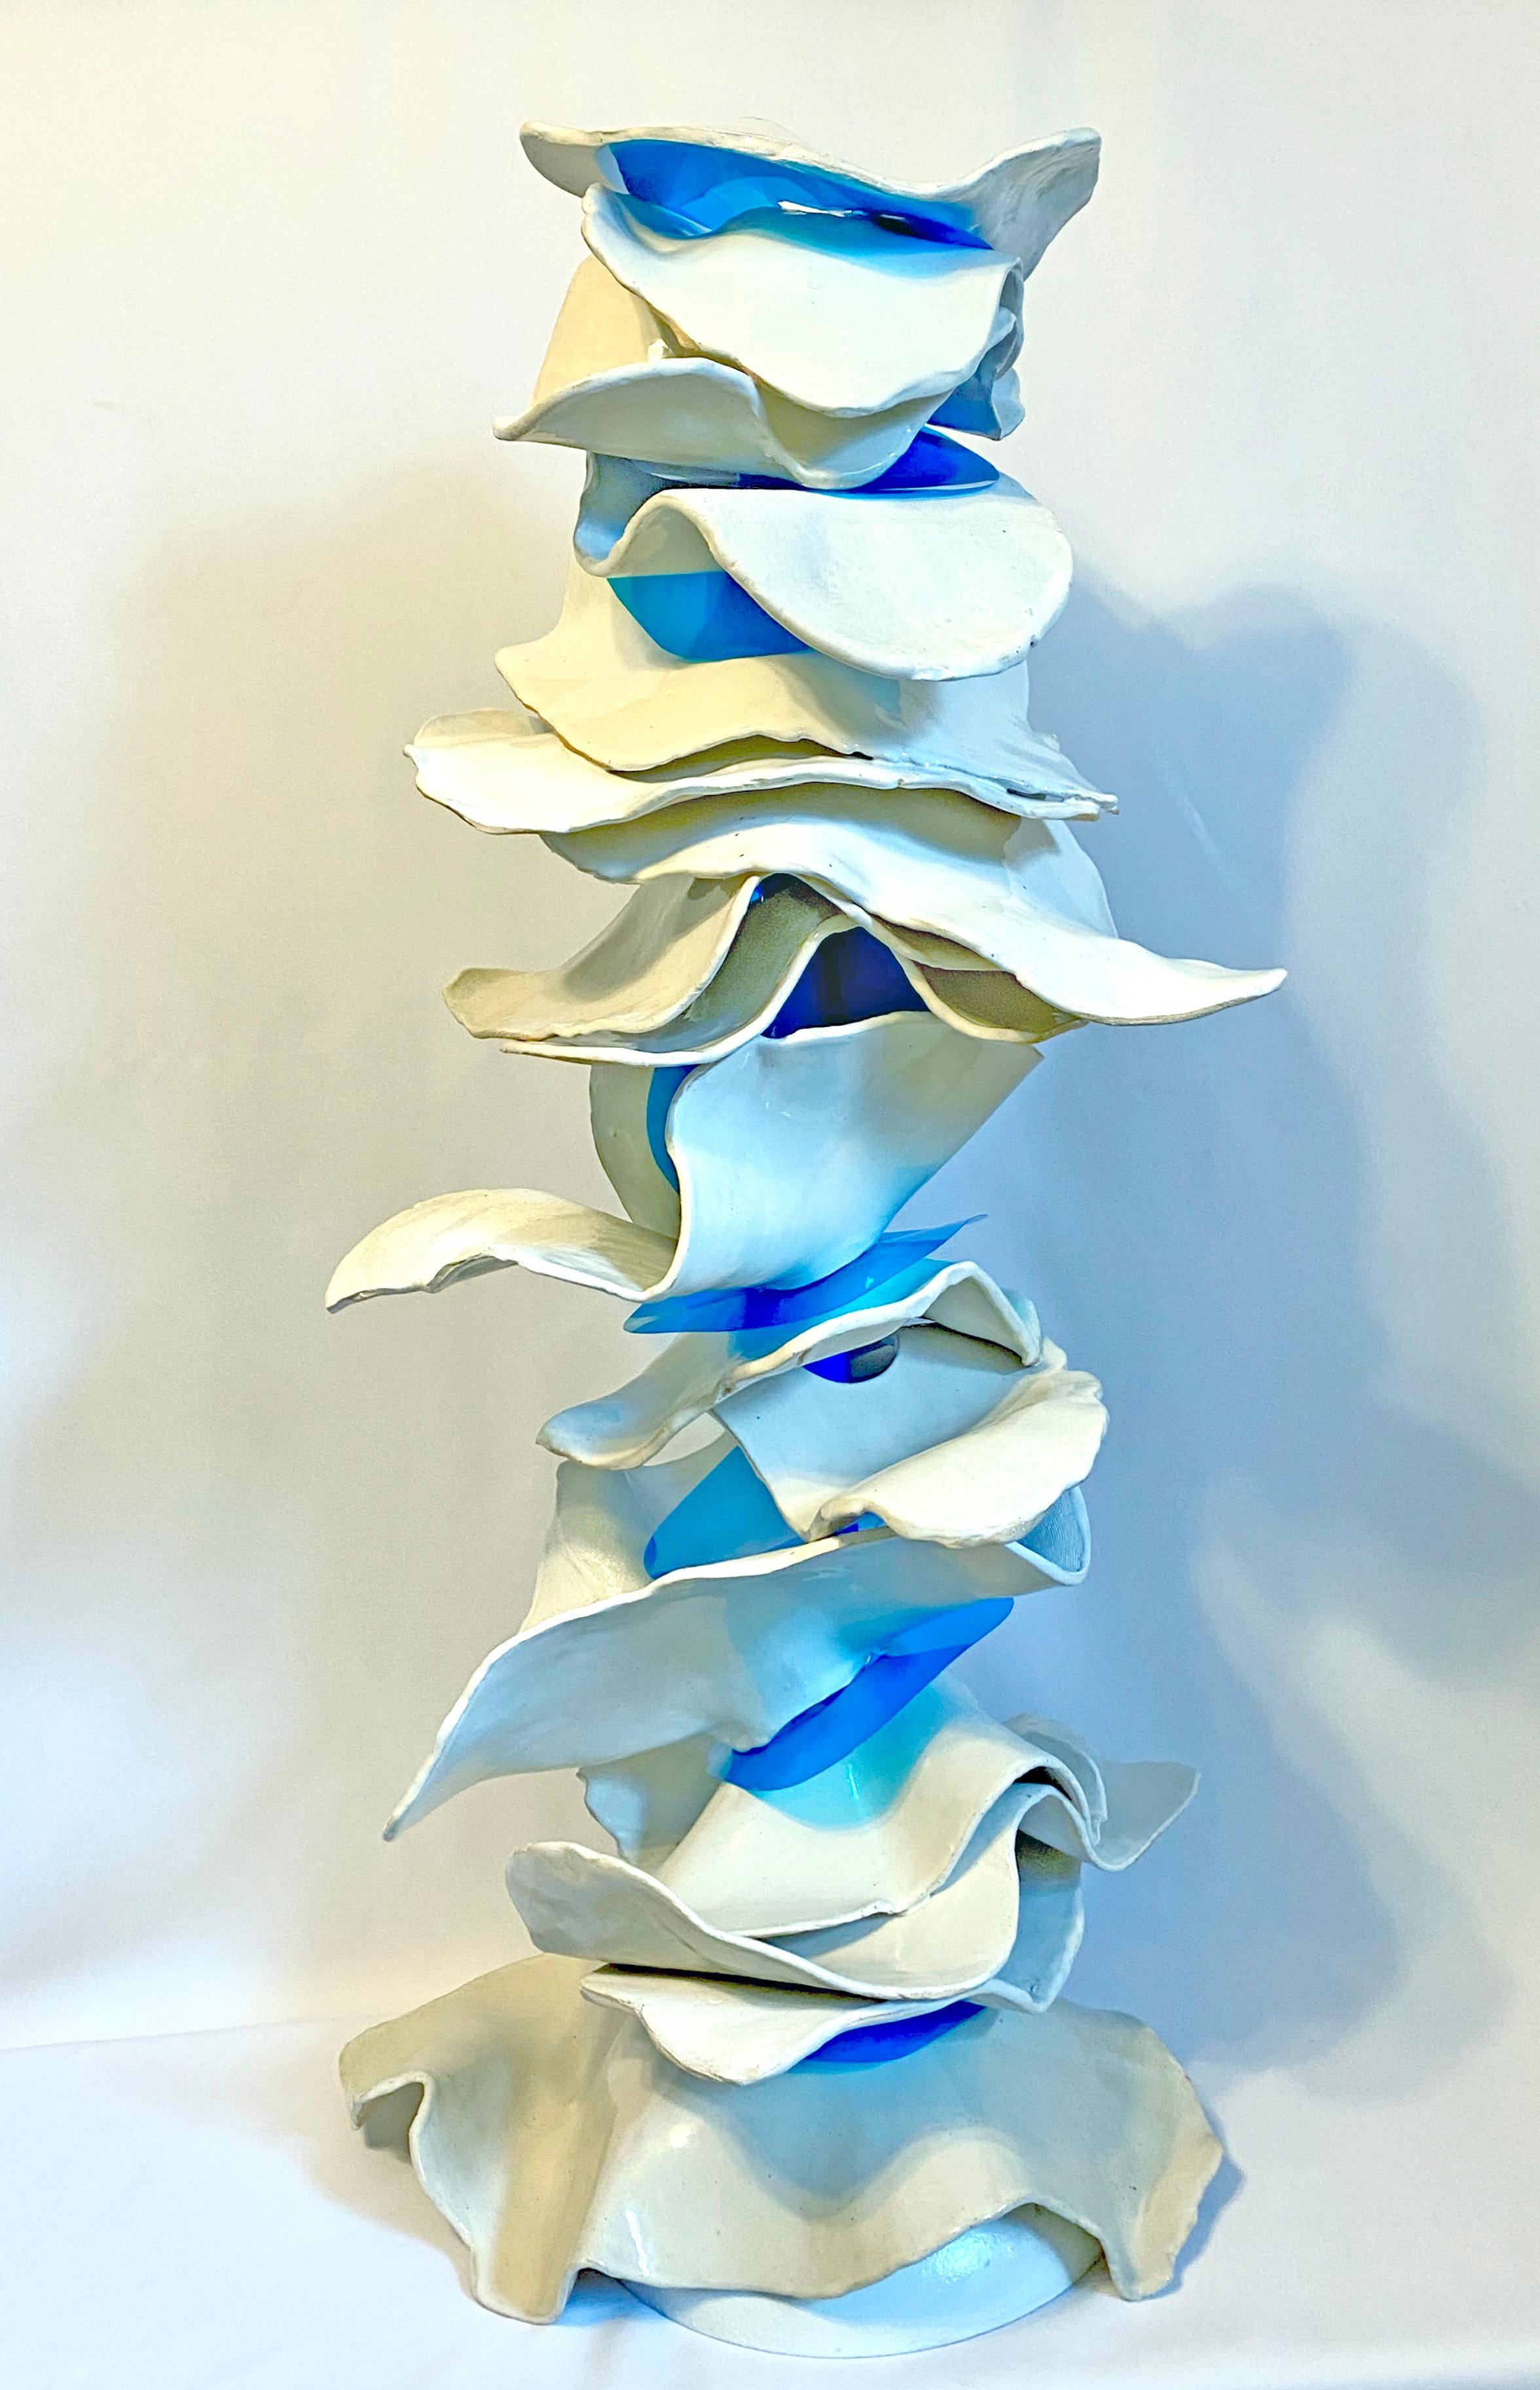 Stacked - Sculpture by Kristina Larson